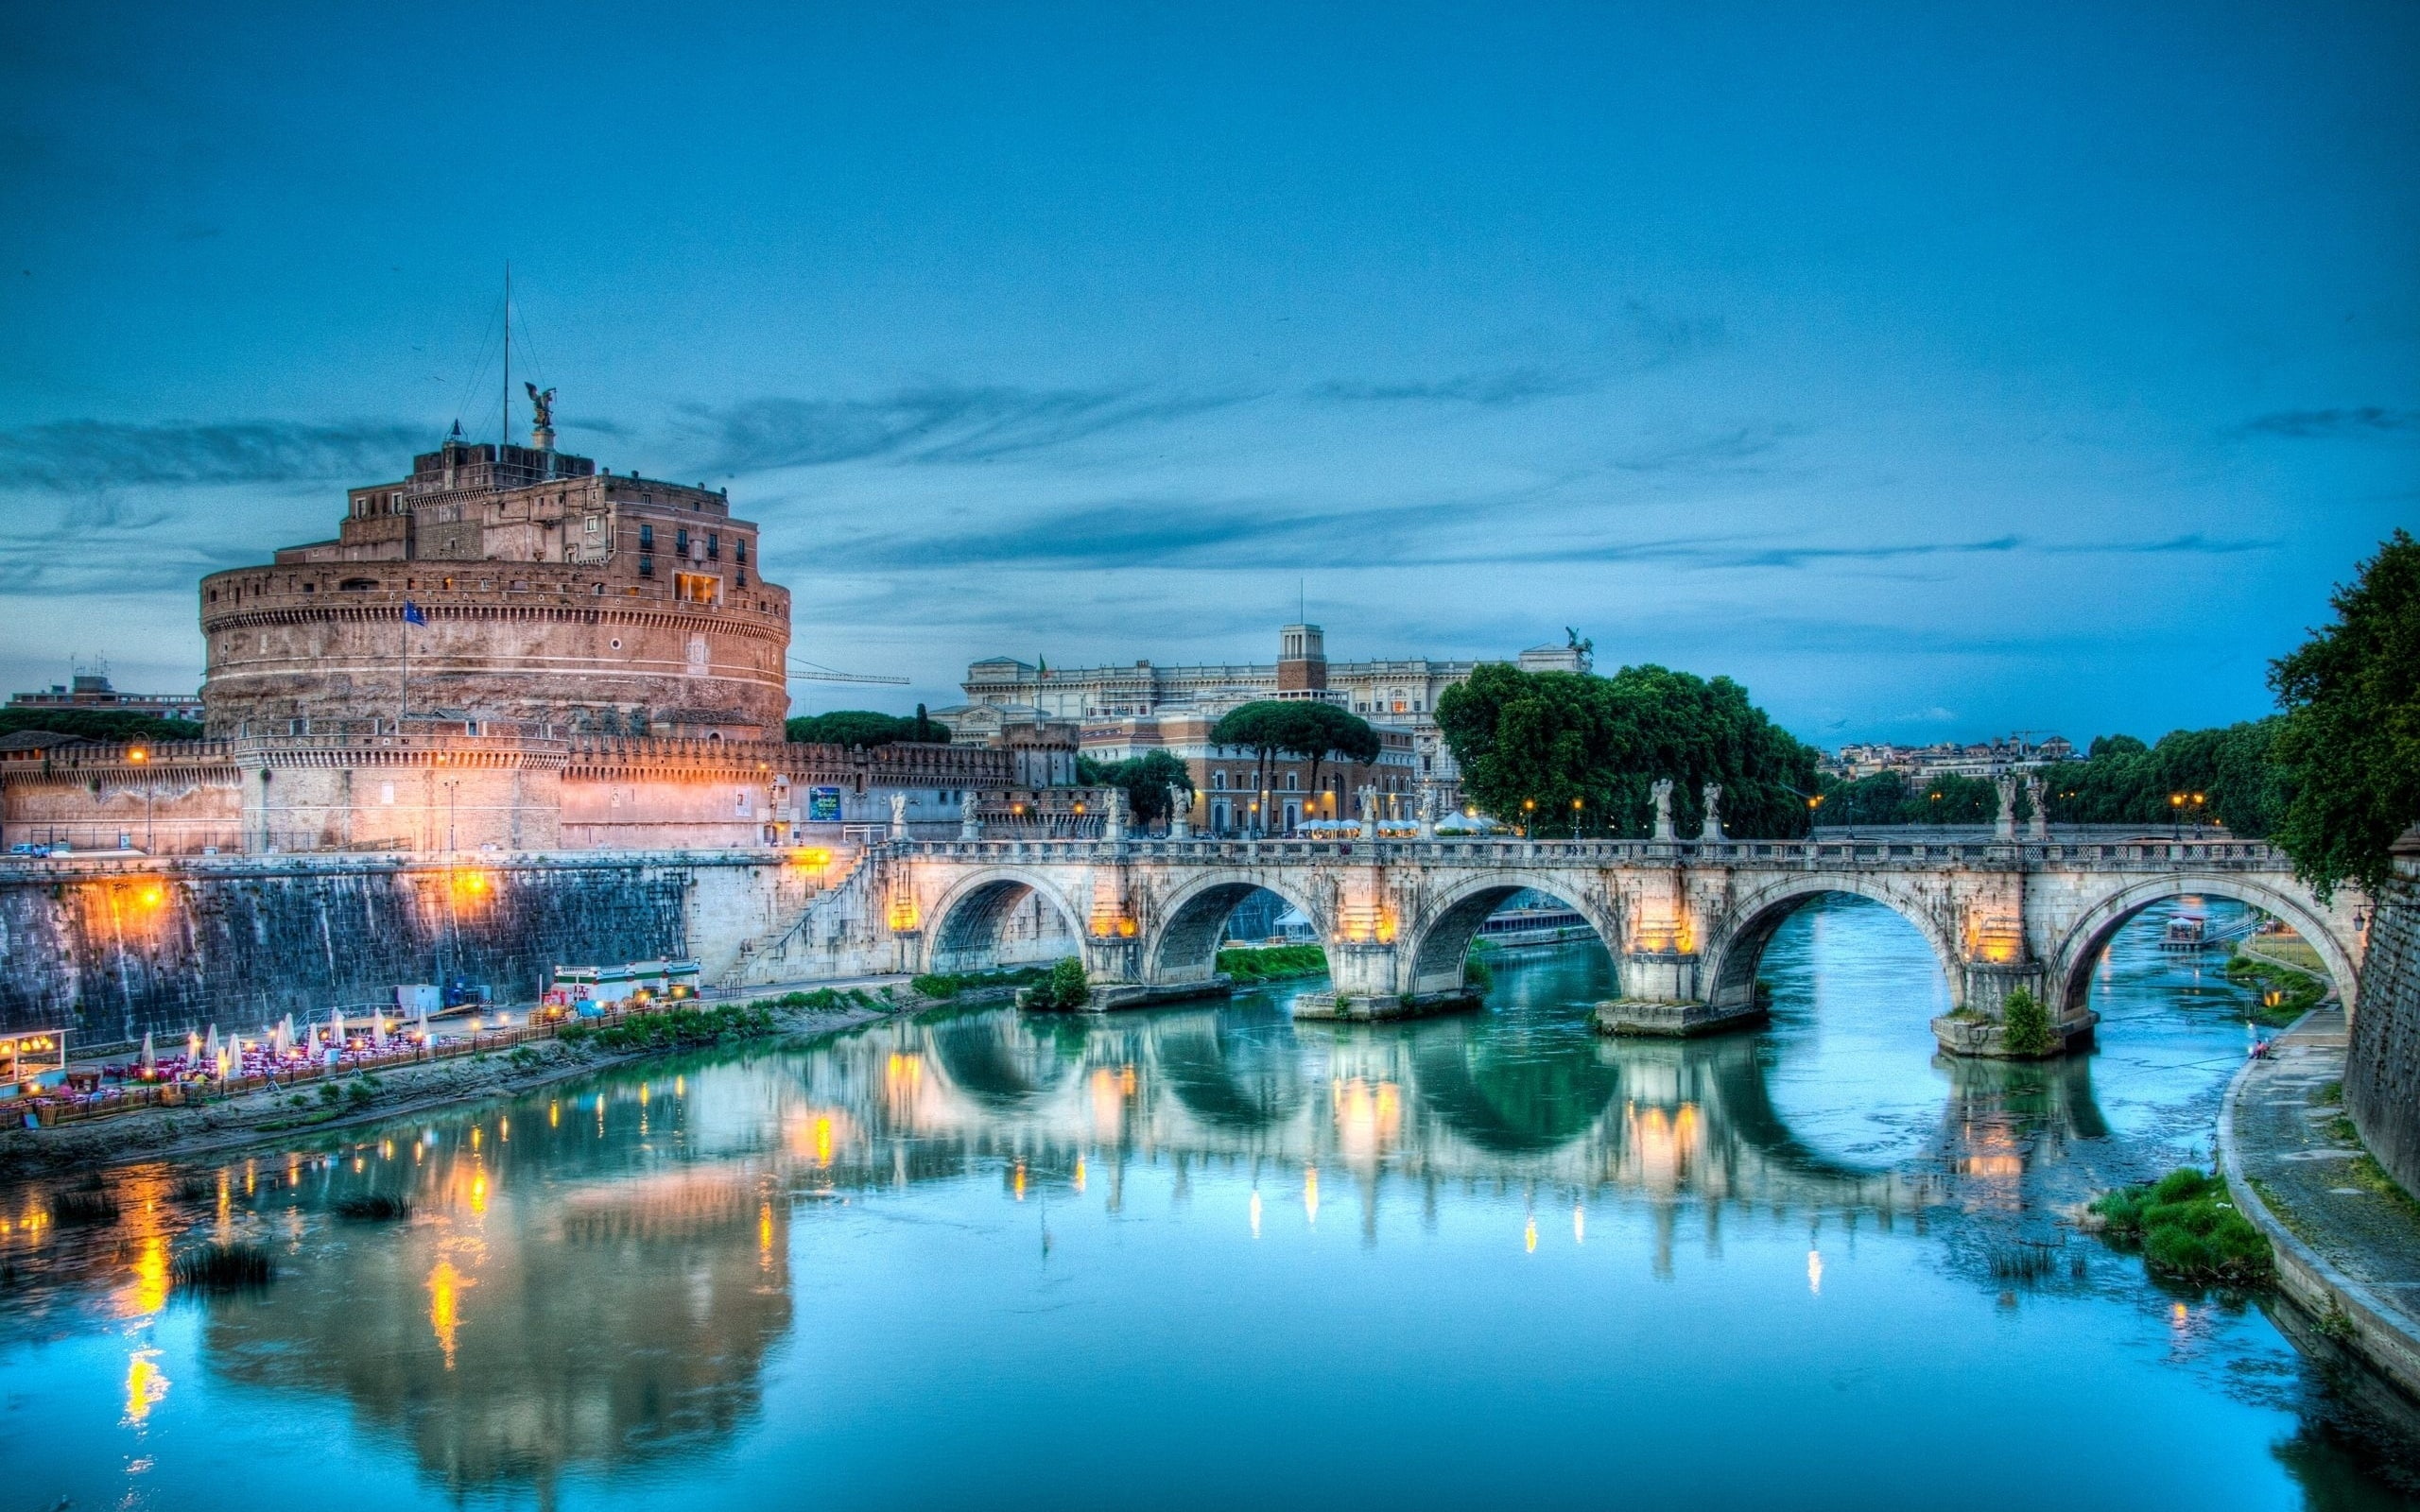 Rome, Italy Tiber River and Castel Sant'Angelo